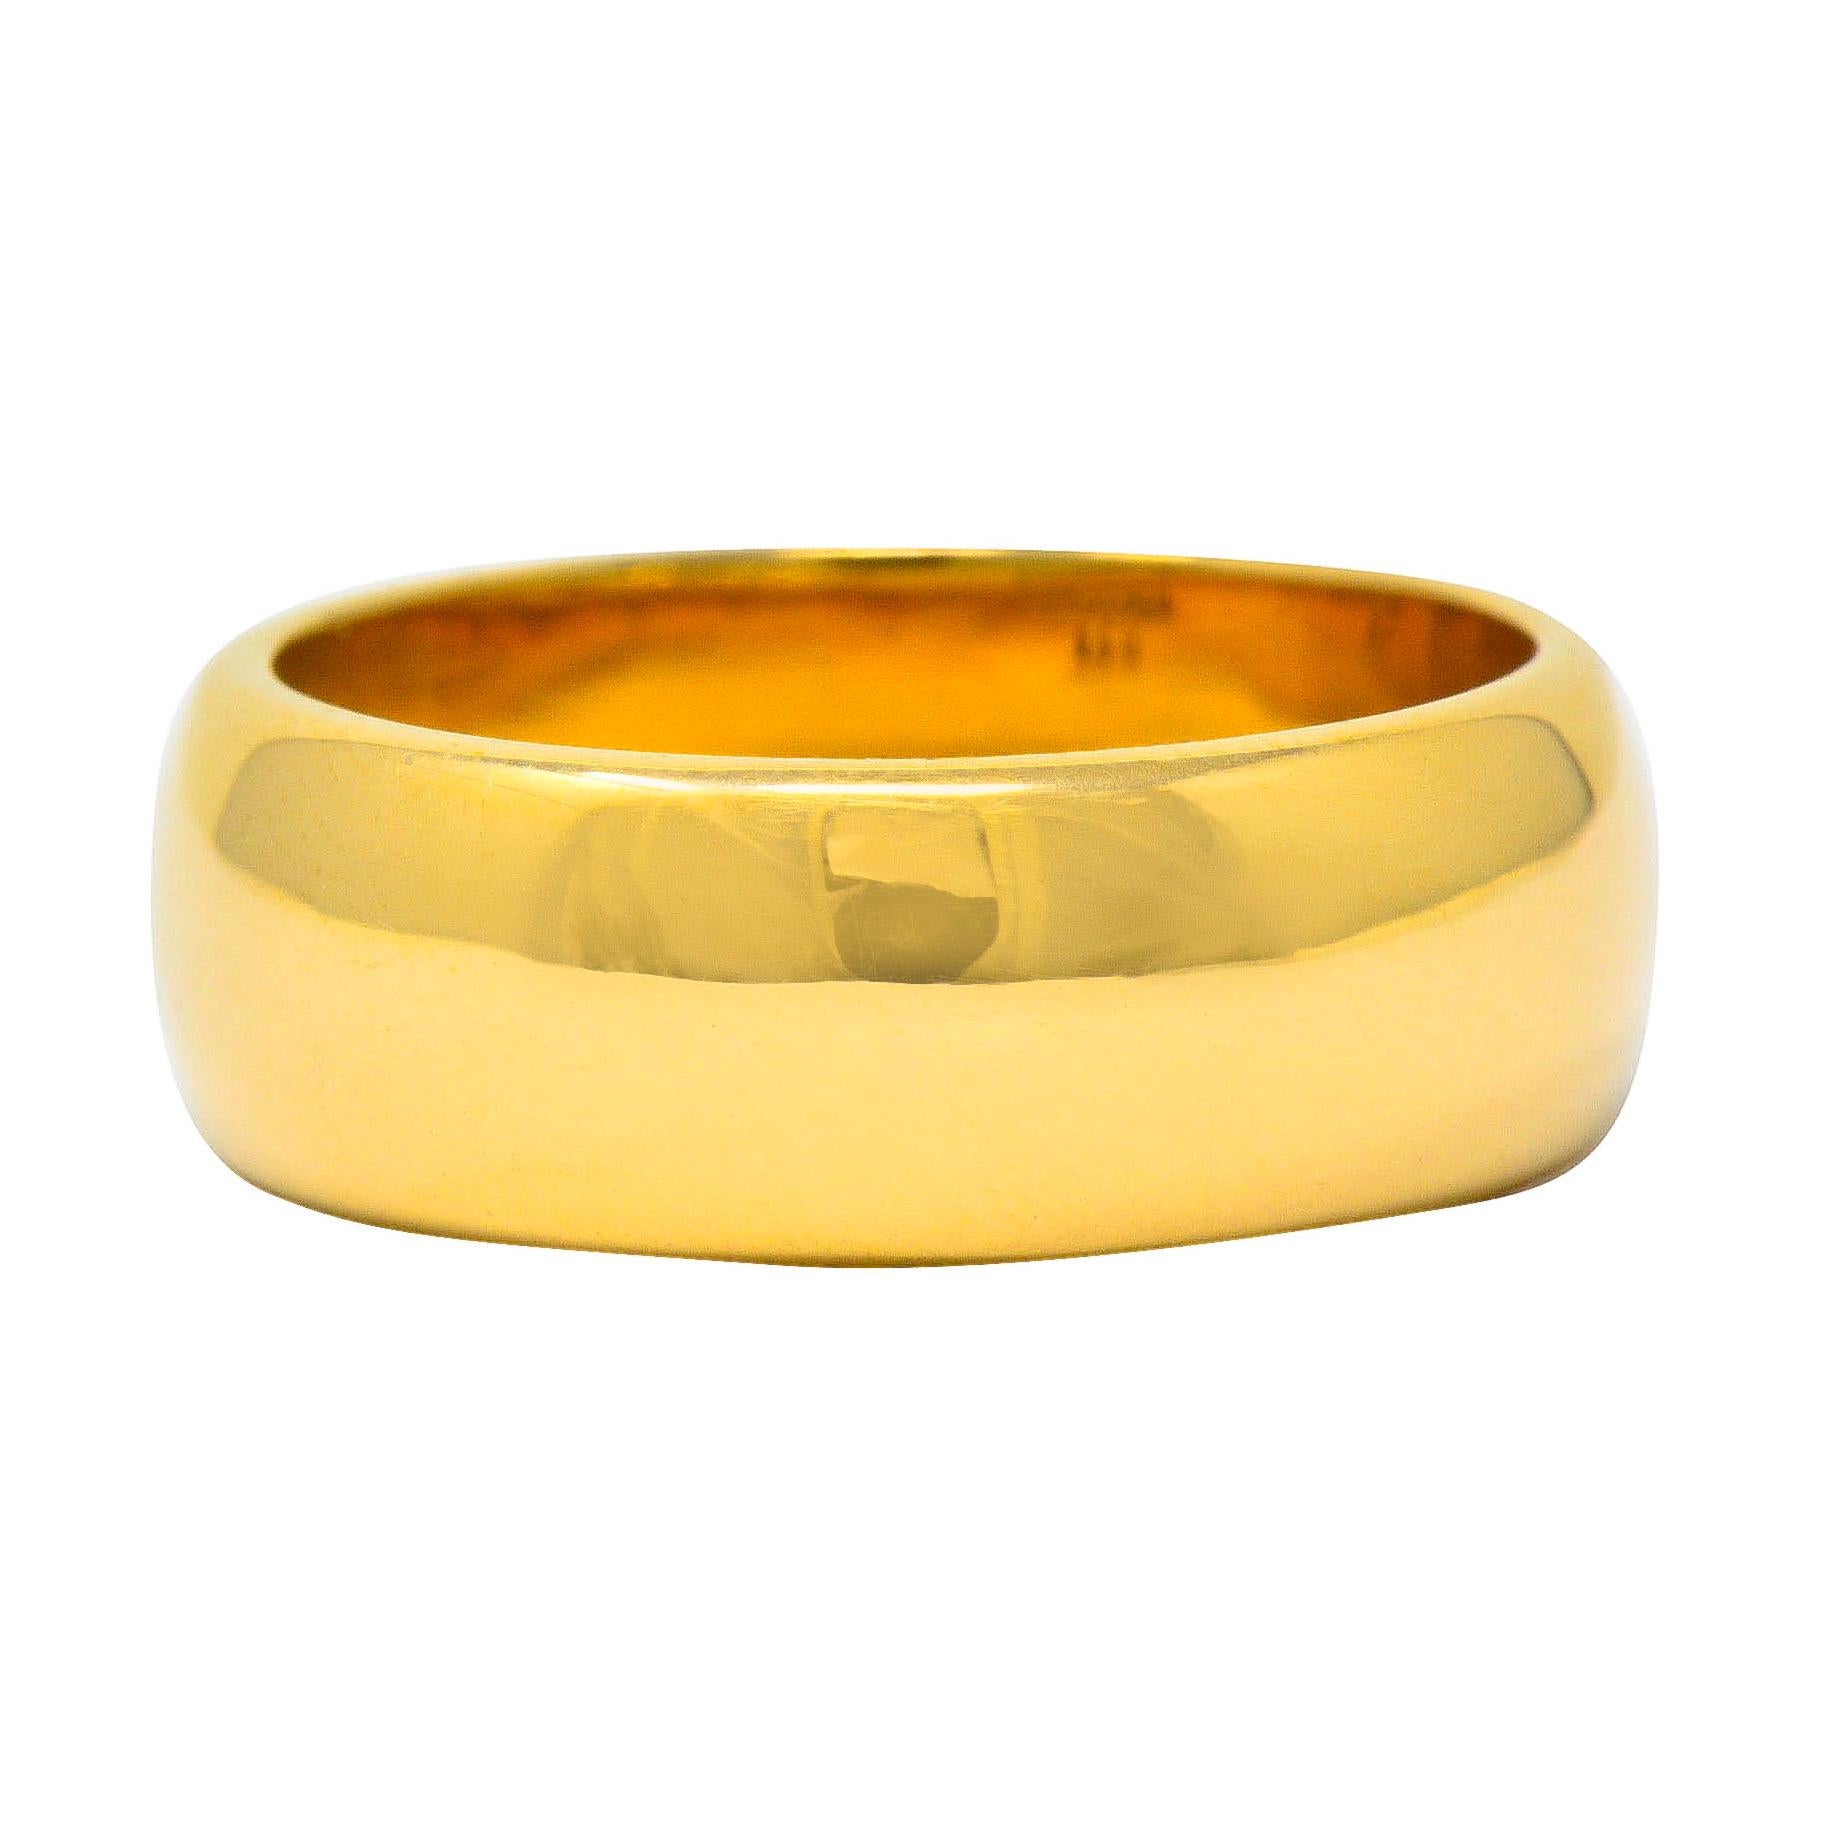 Wide band ring features a rounded curvature and a gleaming polish

Stamped 14K for 14 karat gold

Fully signed Tiffany & Co.

Ring Size: 6 & sizable

Measures: 6.8 mm wide and sits 1.7 mm high

Total weight: 7.4 grams

Classic. Shining. Vow.
